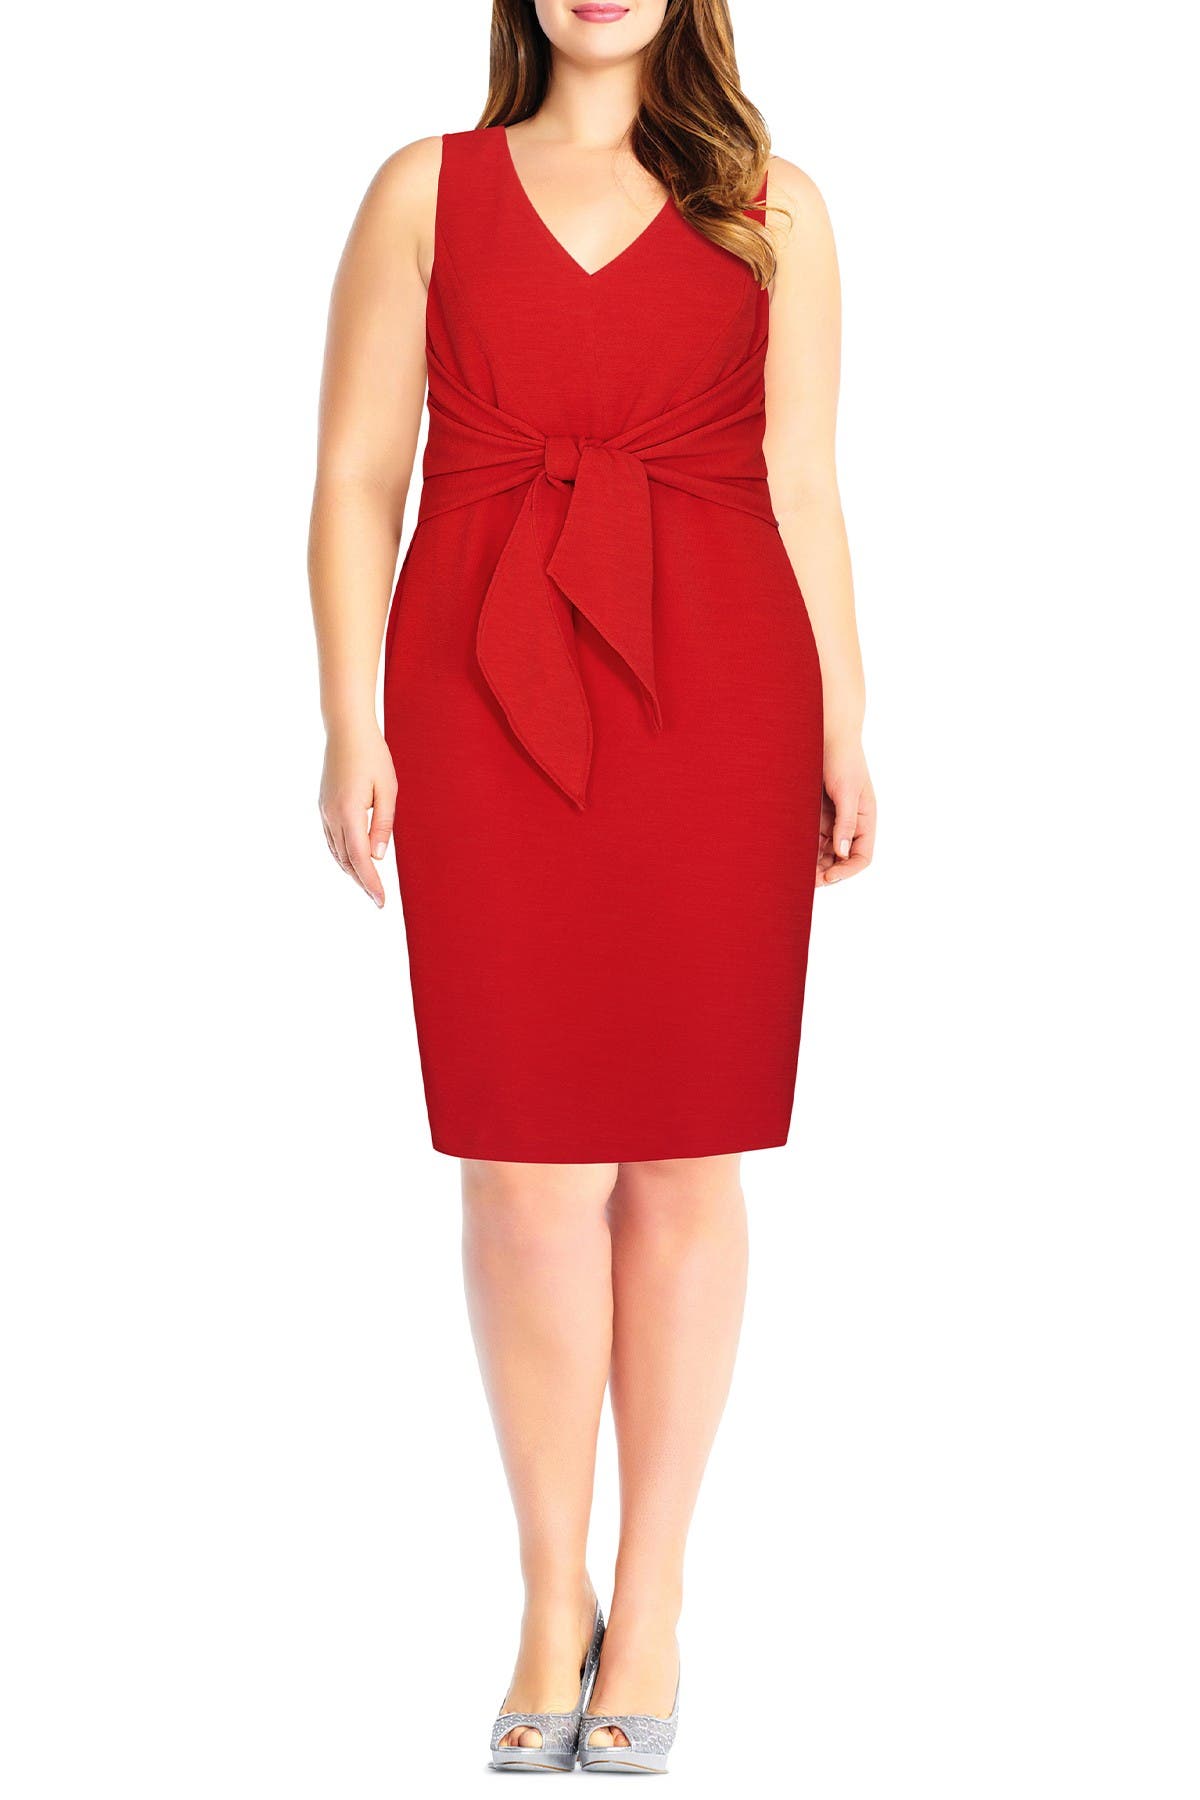 Adrianna Papell Rio Tie Front Sheath Dress In Ht Tomato